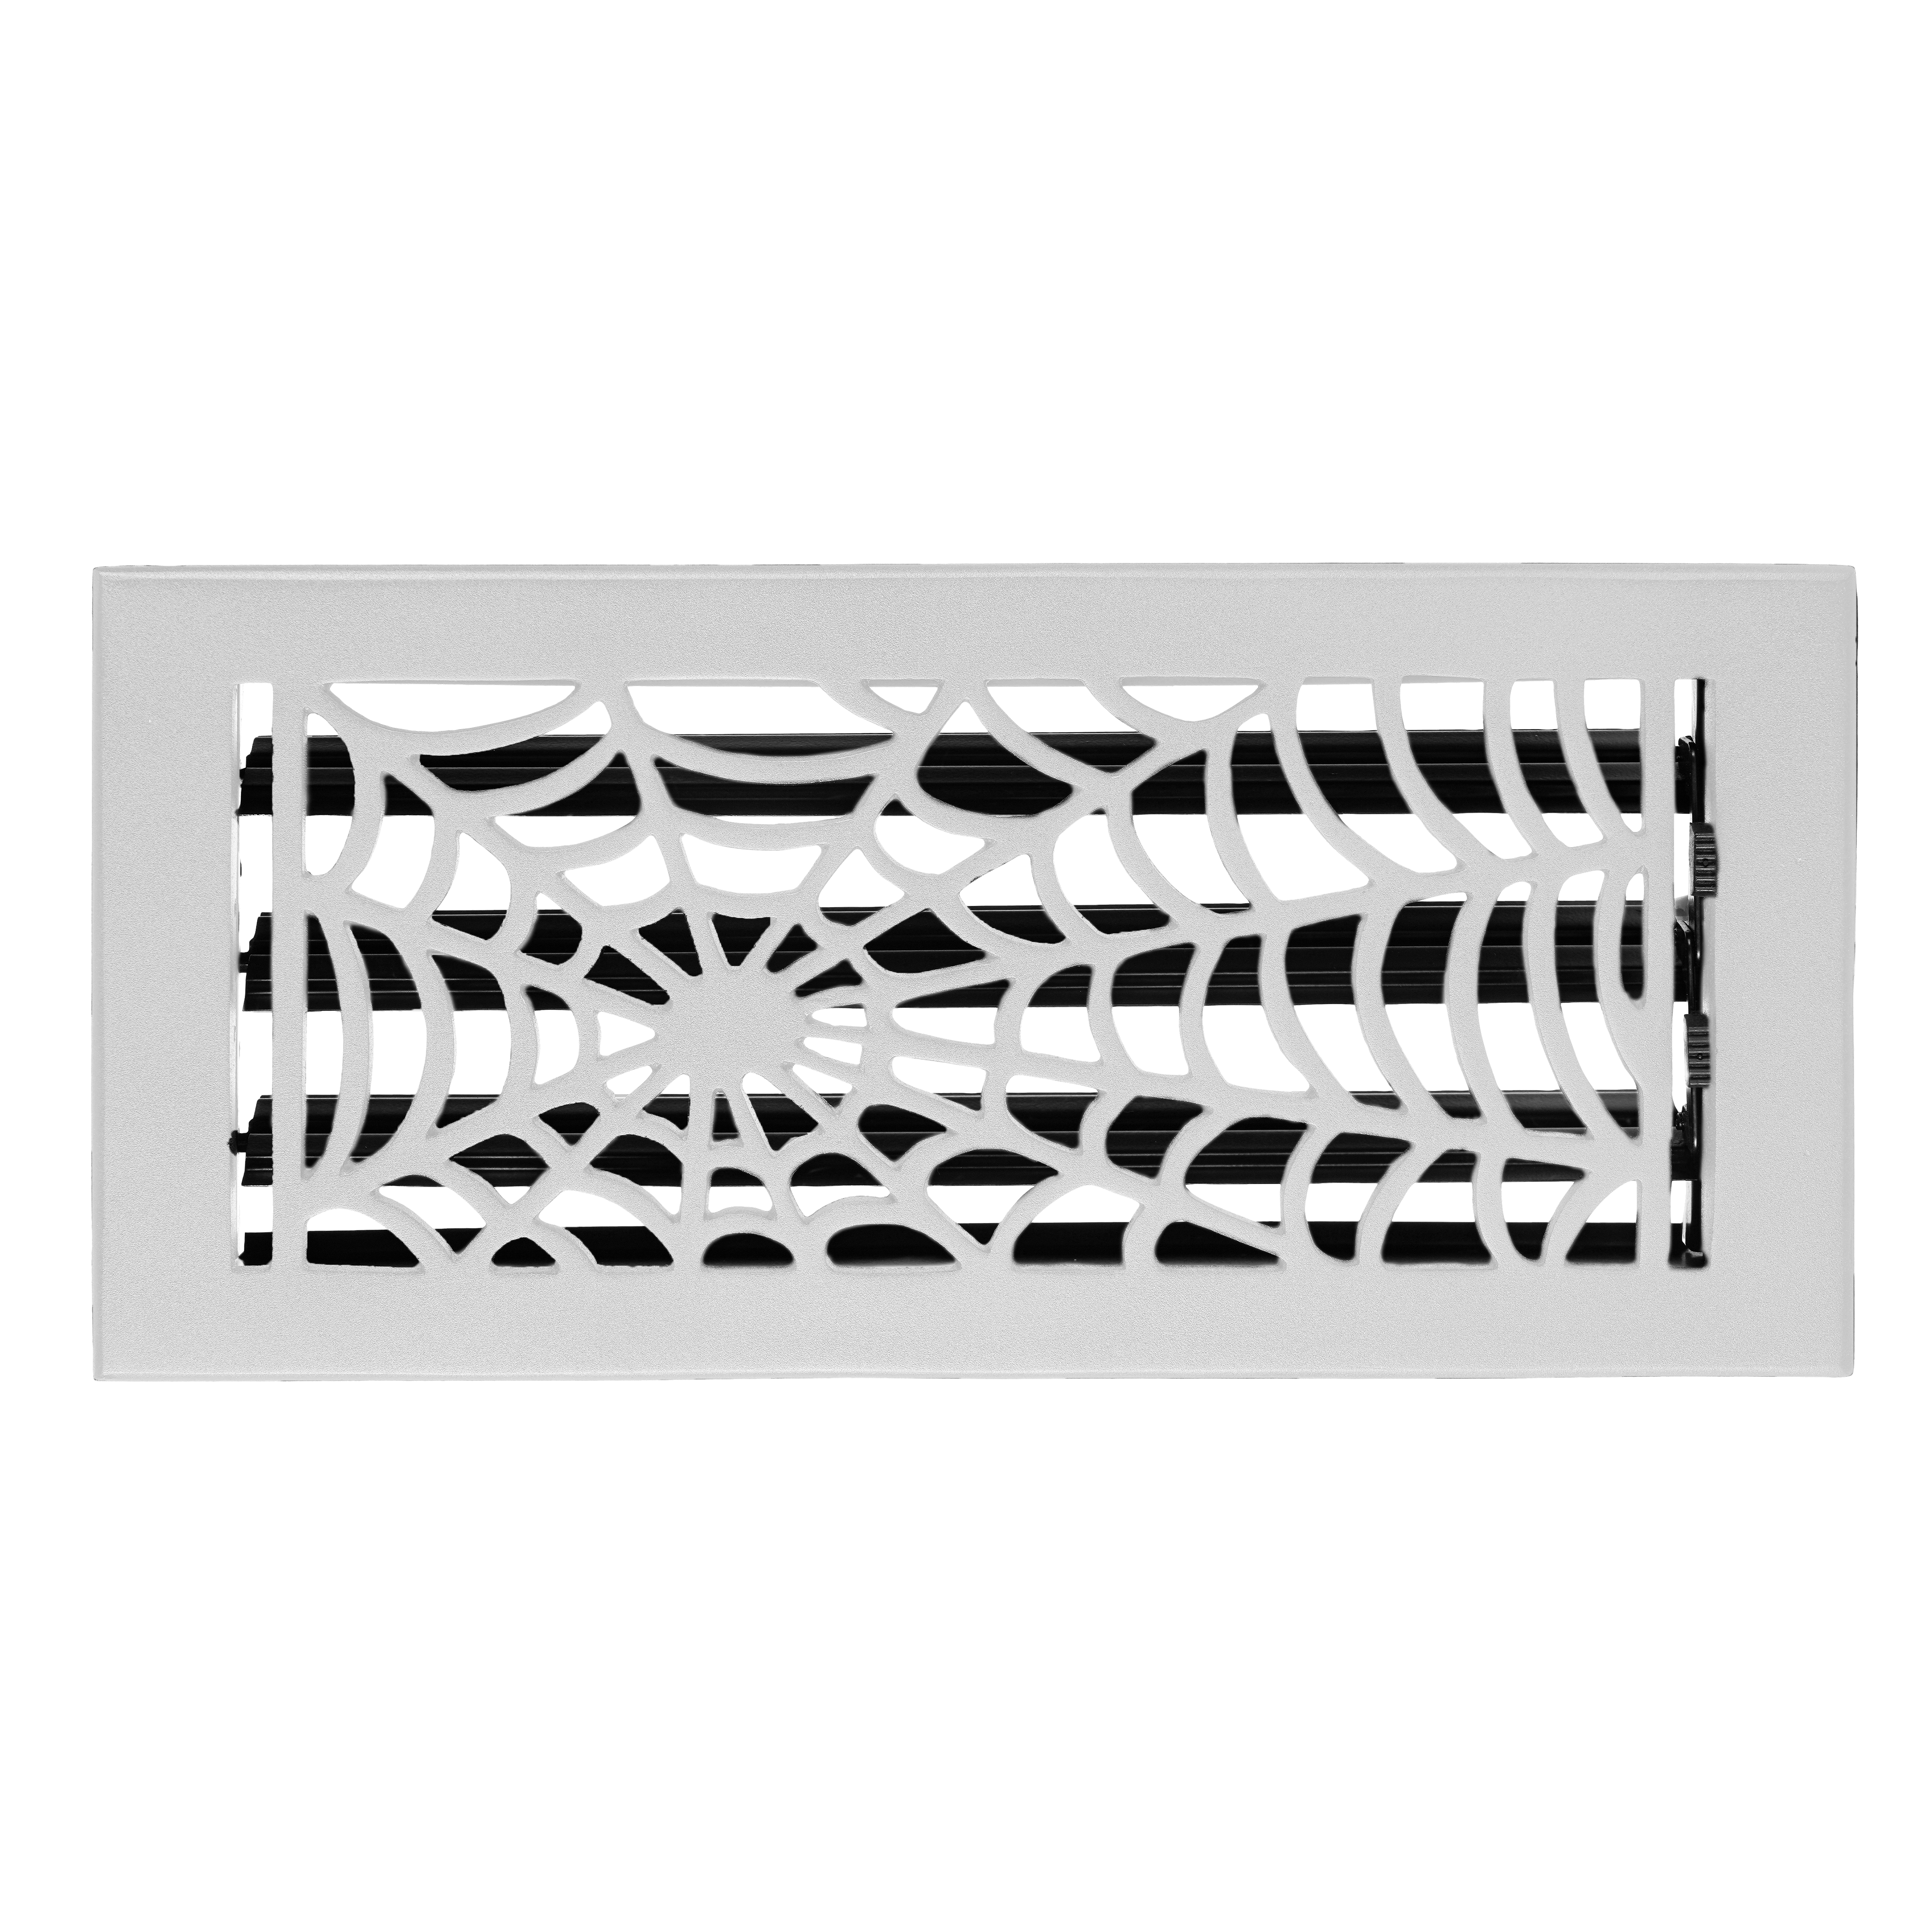 Spooky Gothic Vent cover 6"x 14" Duct Opening (Overall 7-1/2"x 15-3/4") in Spider Web Design | Solid Cast Aluminium Register Cover | Powder Coated